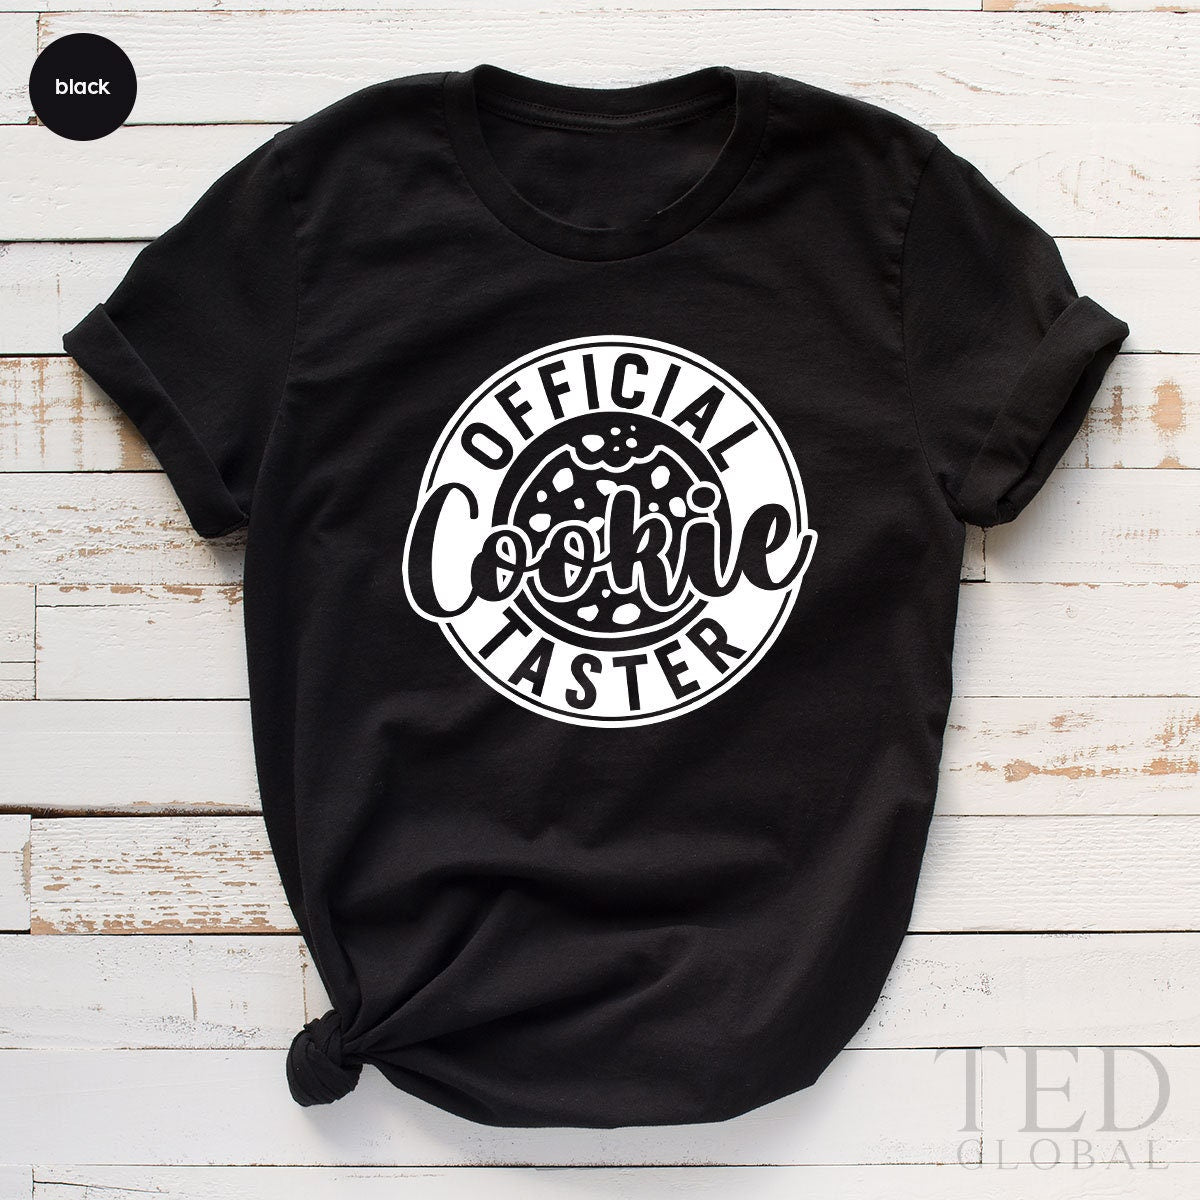 Cute Official Cookie Taster T-Shirt, Family Christmas Shirt, Funny Baking Shirts, Christmas Baking Shirt, Cookie TShirt, Gift For Christmas - Fastdeliverytees.com